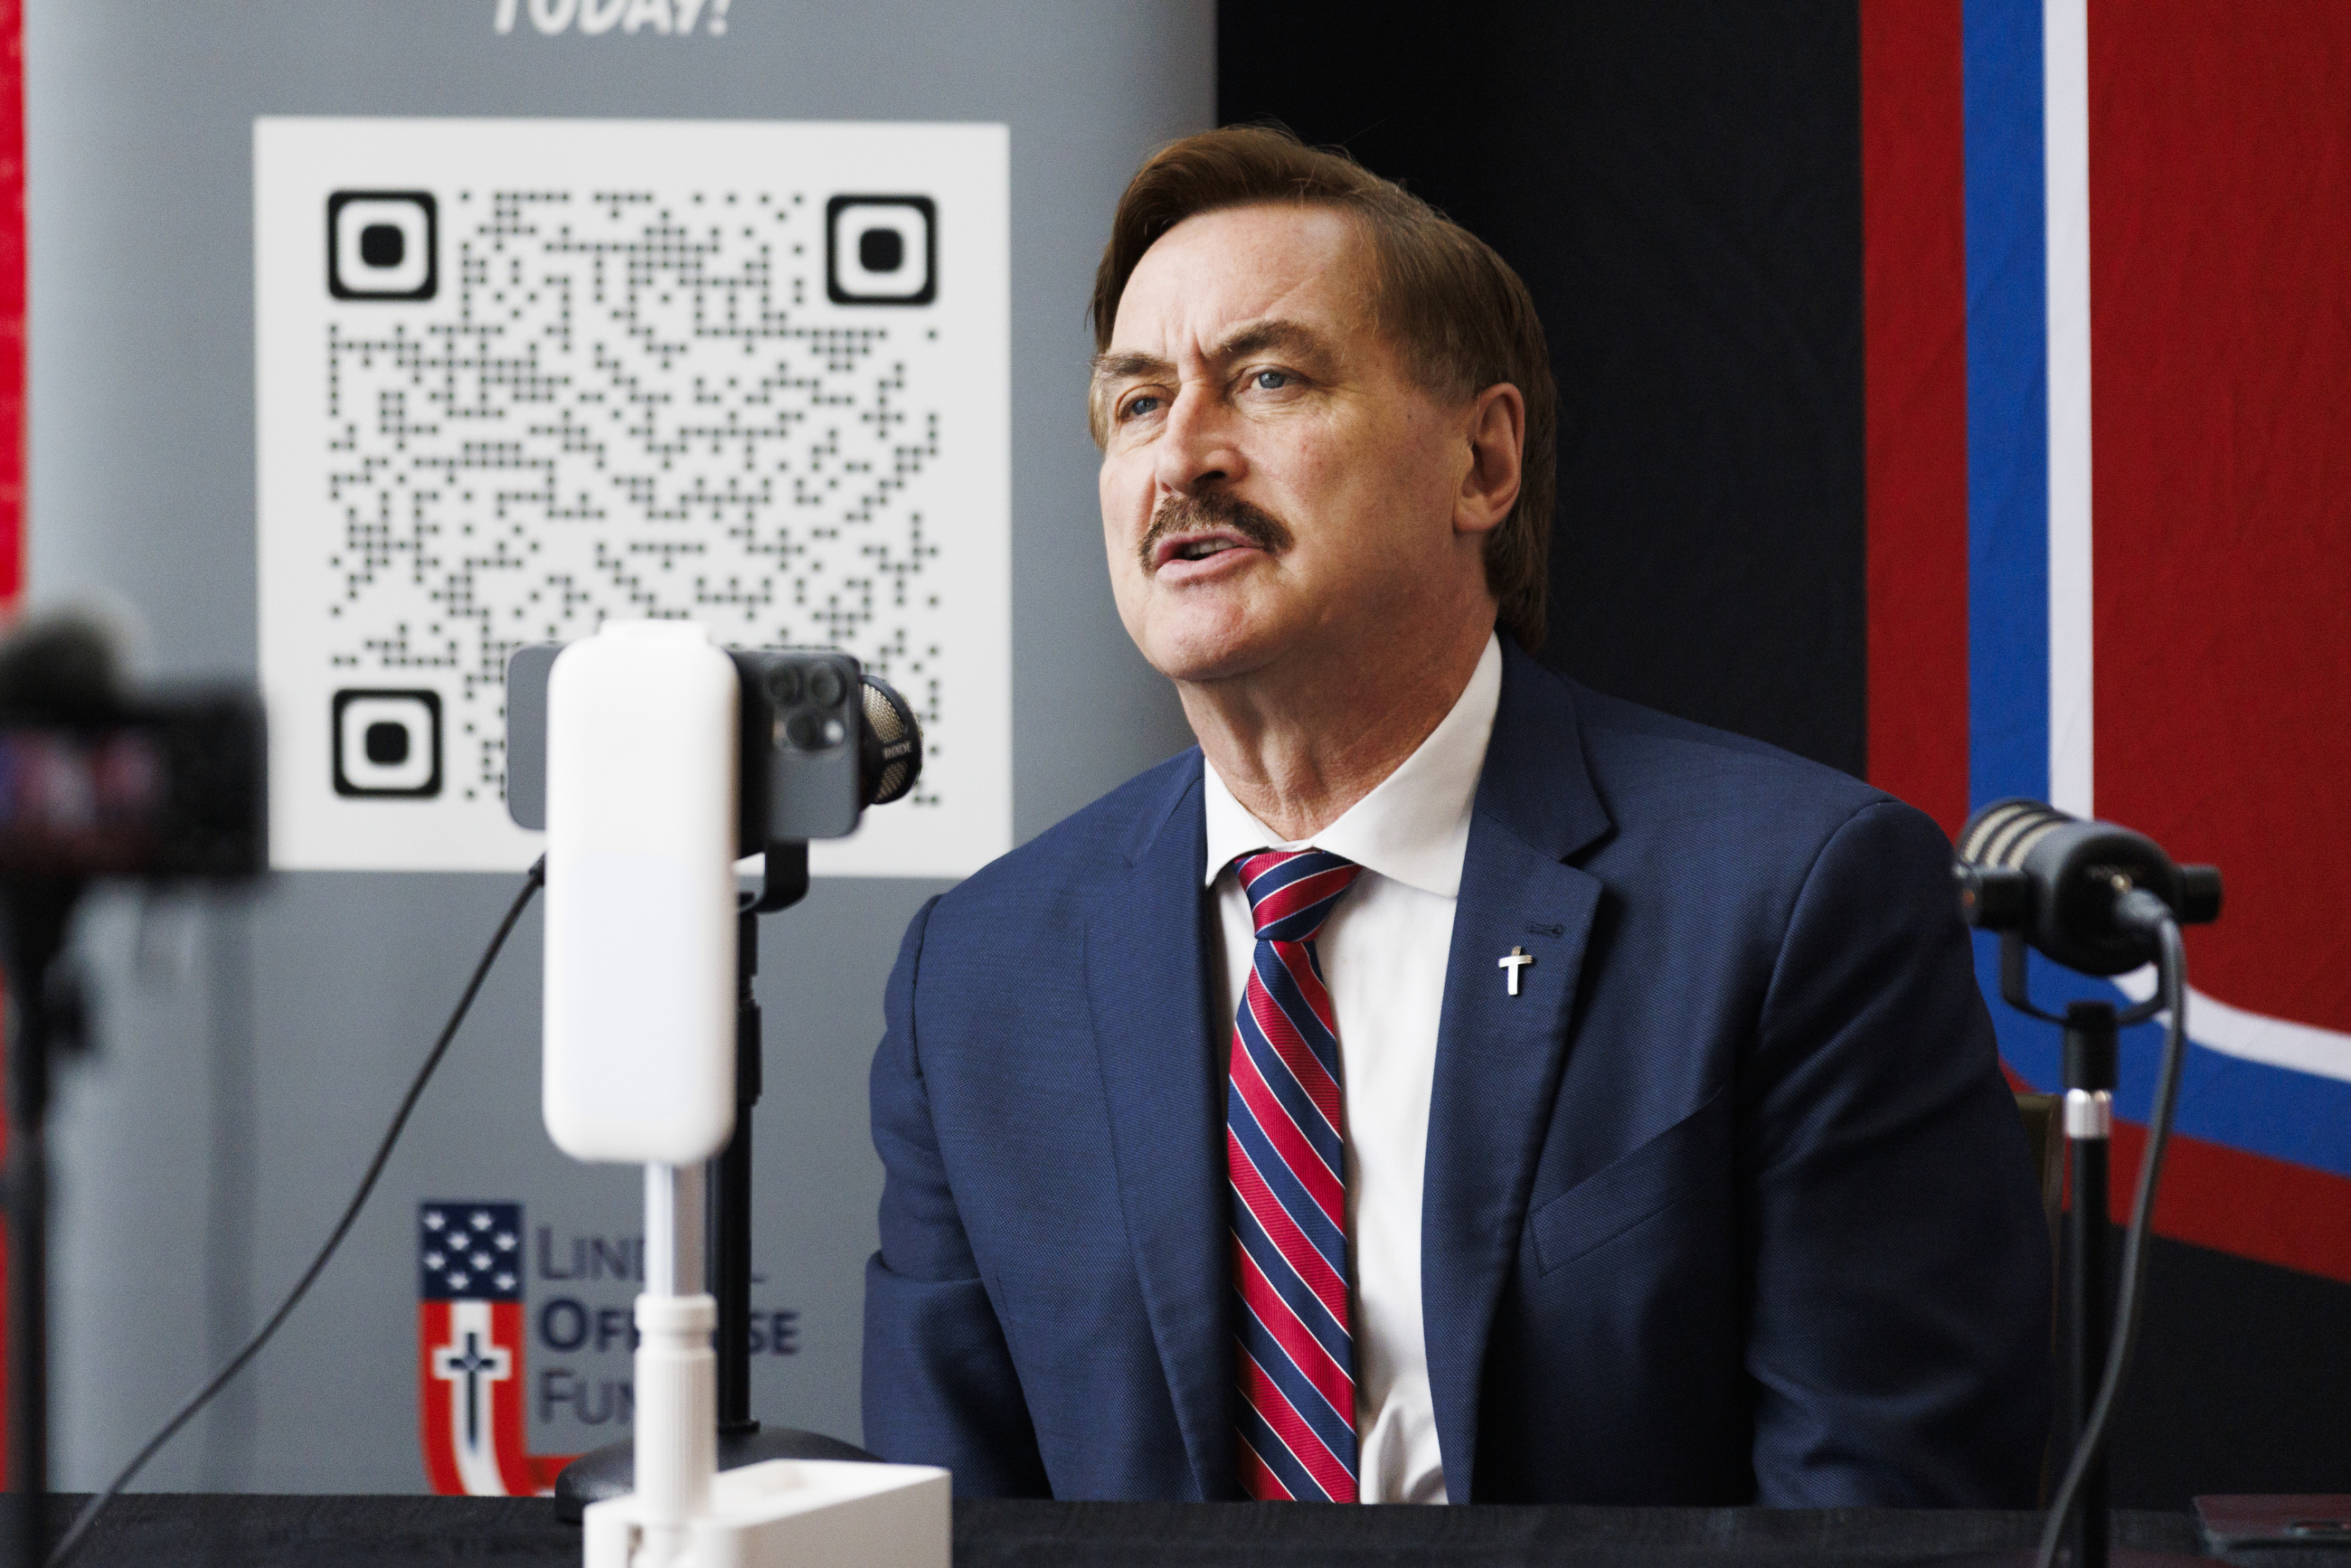 Mike Lindell faces potential court hearing over dire financial situation